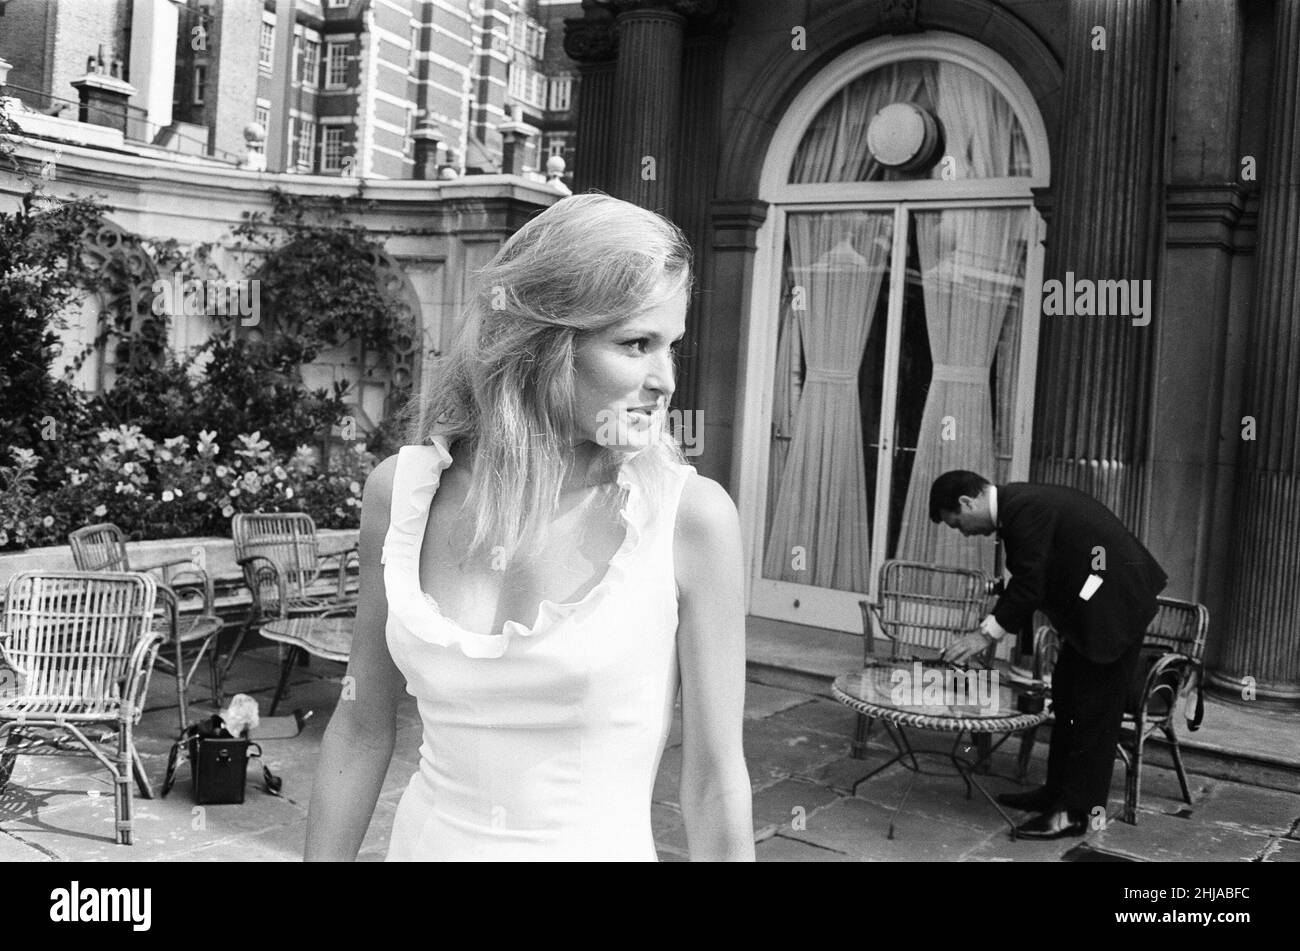 Ursula Andress, swiss actress, photo-call for 1965 film SHE, based on She : A History of Adventure, a novel by H. Rider Haggard, pictured in Park Lane, London, Wednesday 12th August 1964. Ursula Andress plays Ayesha an immortal queen and high priestess.  SIDE NOTE : Ursula Andress starred as Honey Ryder in James Bond film Dr. No, by Ian Fleming, photo-call taken on day of news of his death. Stock Photo